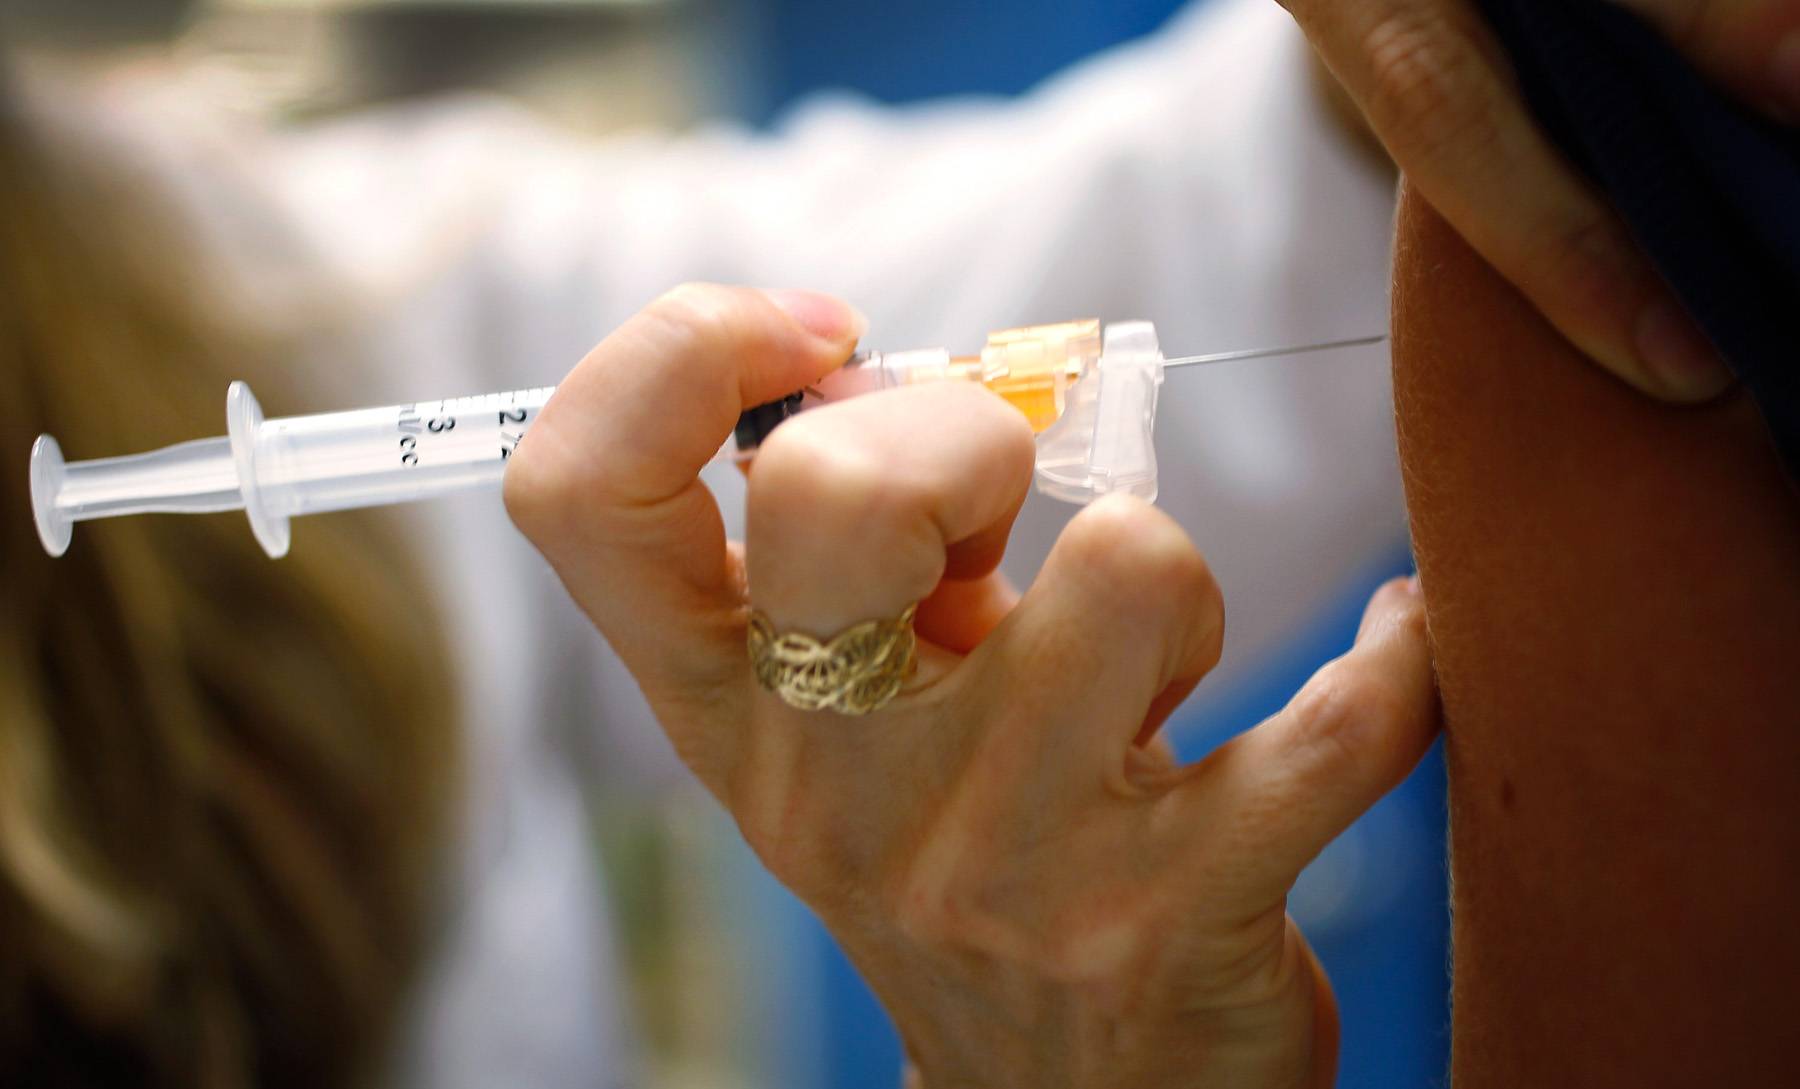 African-American Seniors and the Vaccine Gap